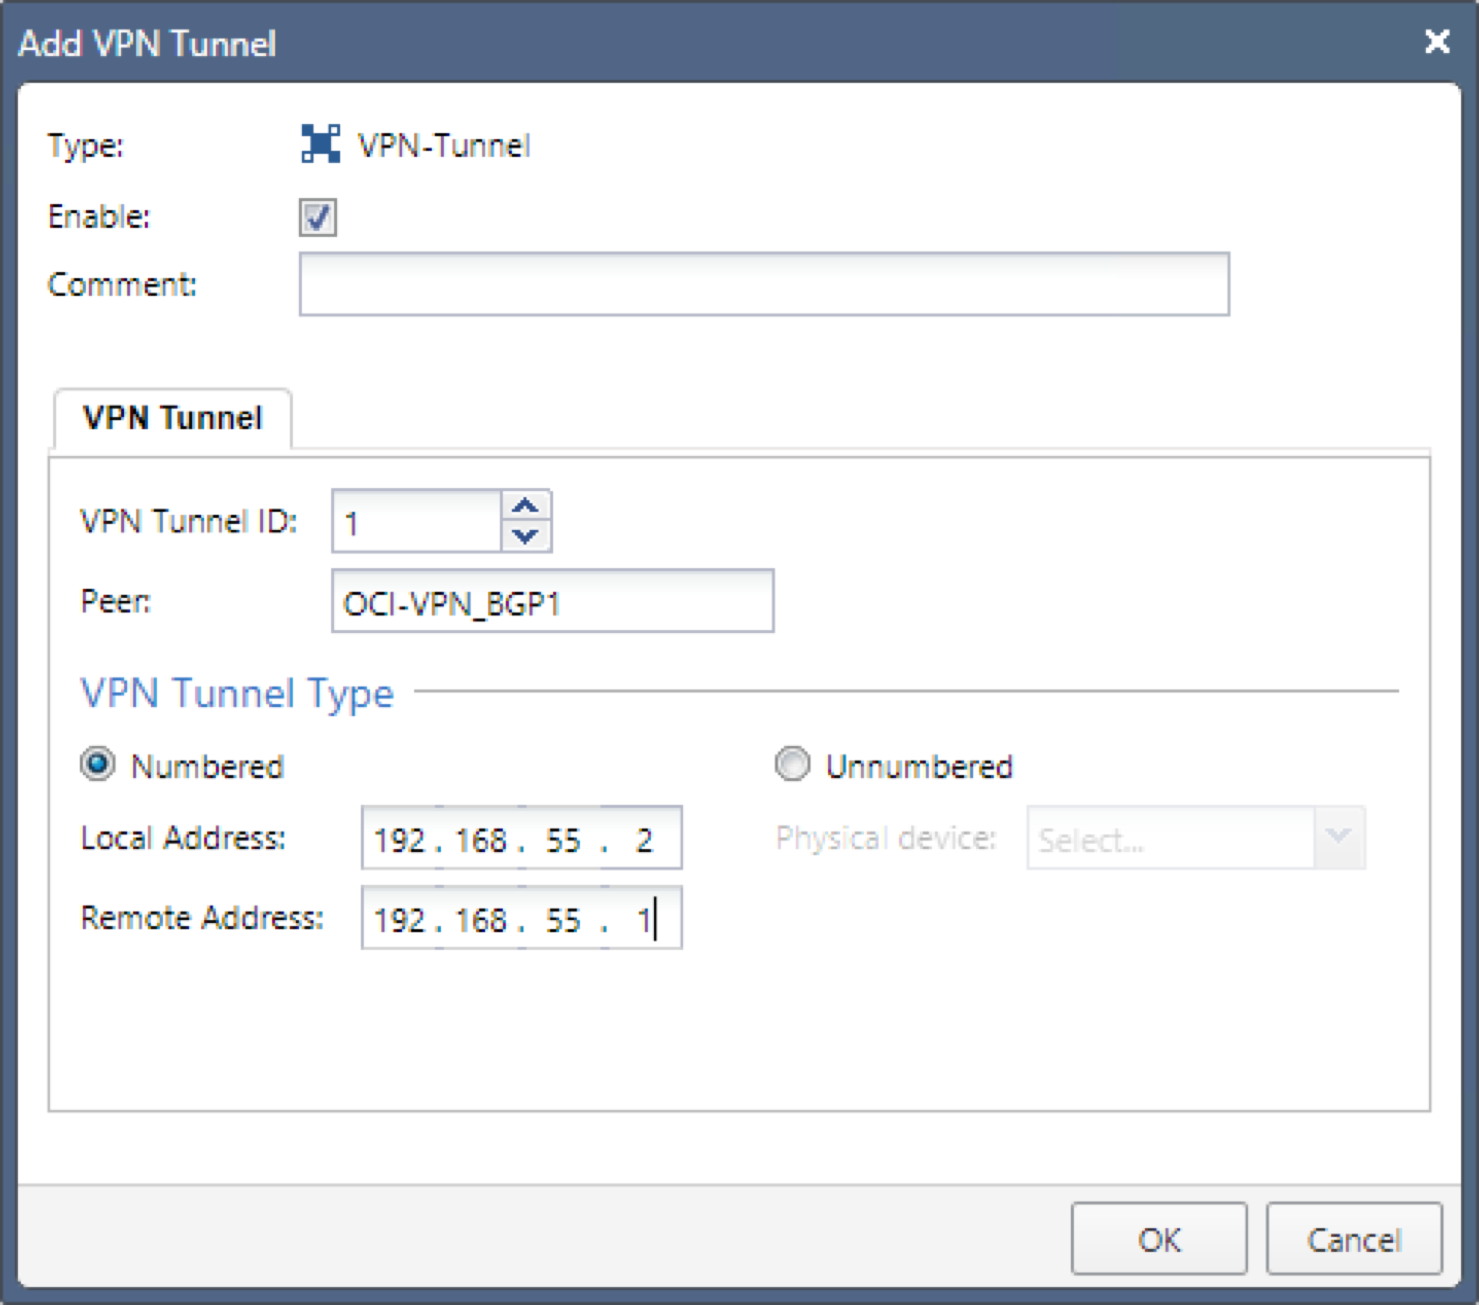 This image shows the VPN tunnel parameters to configure in the GAIA portal.